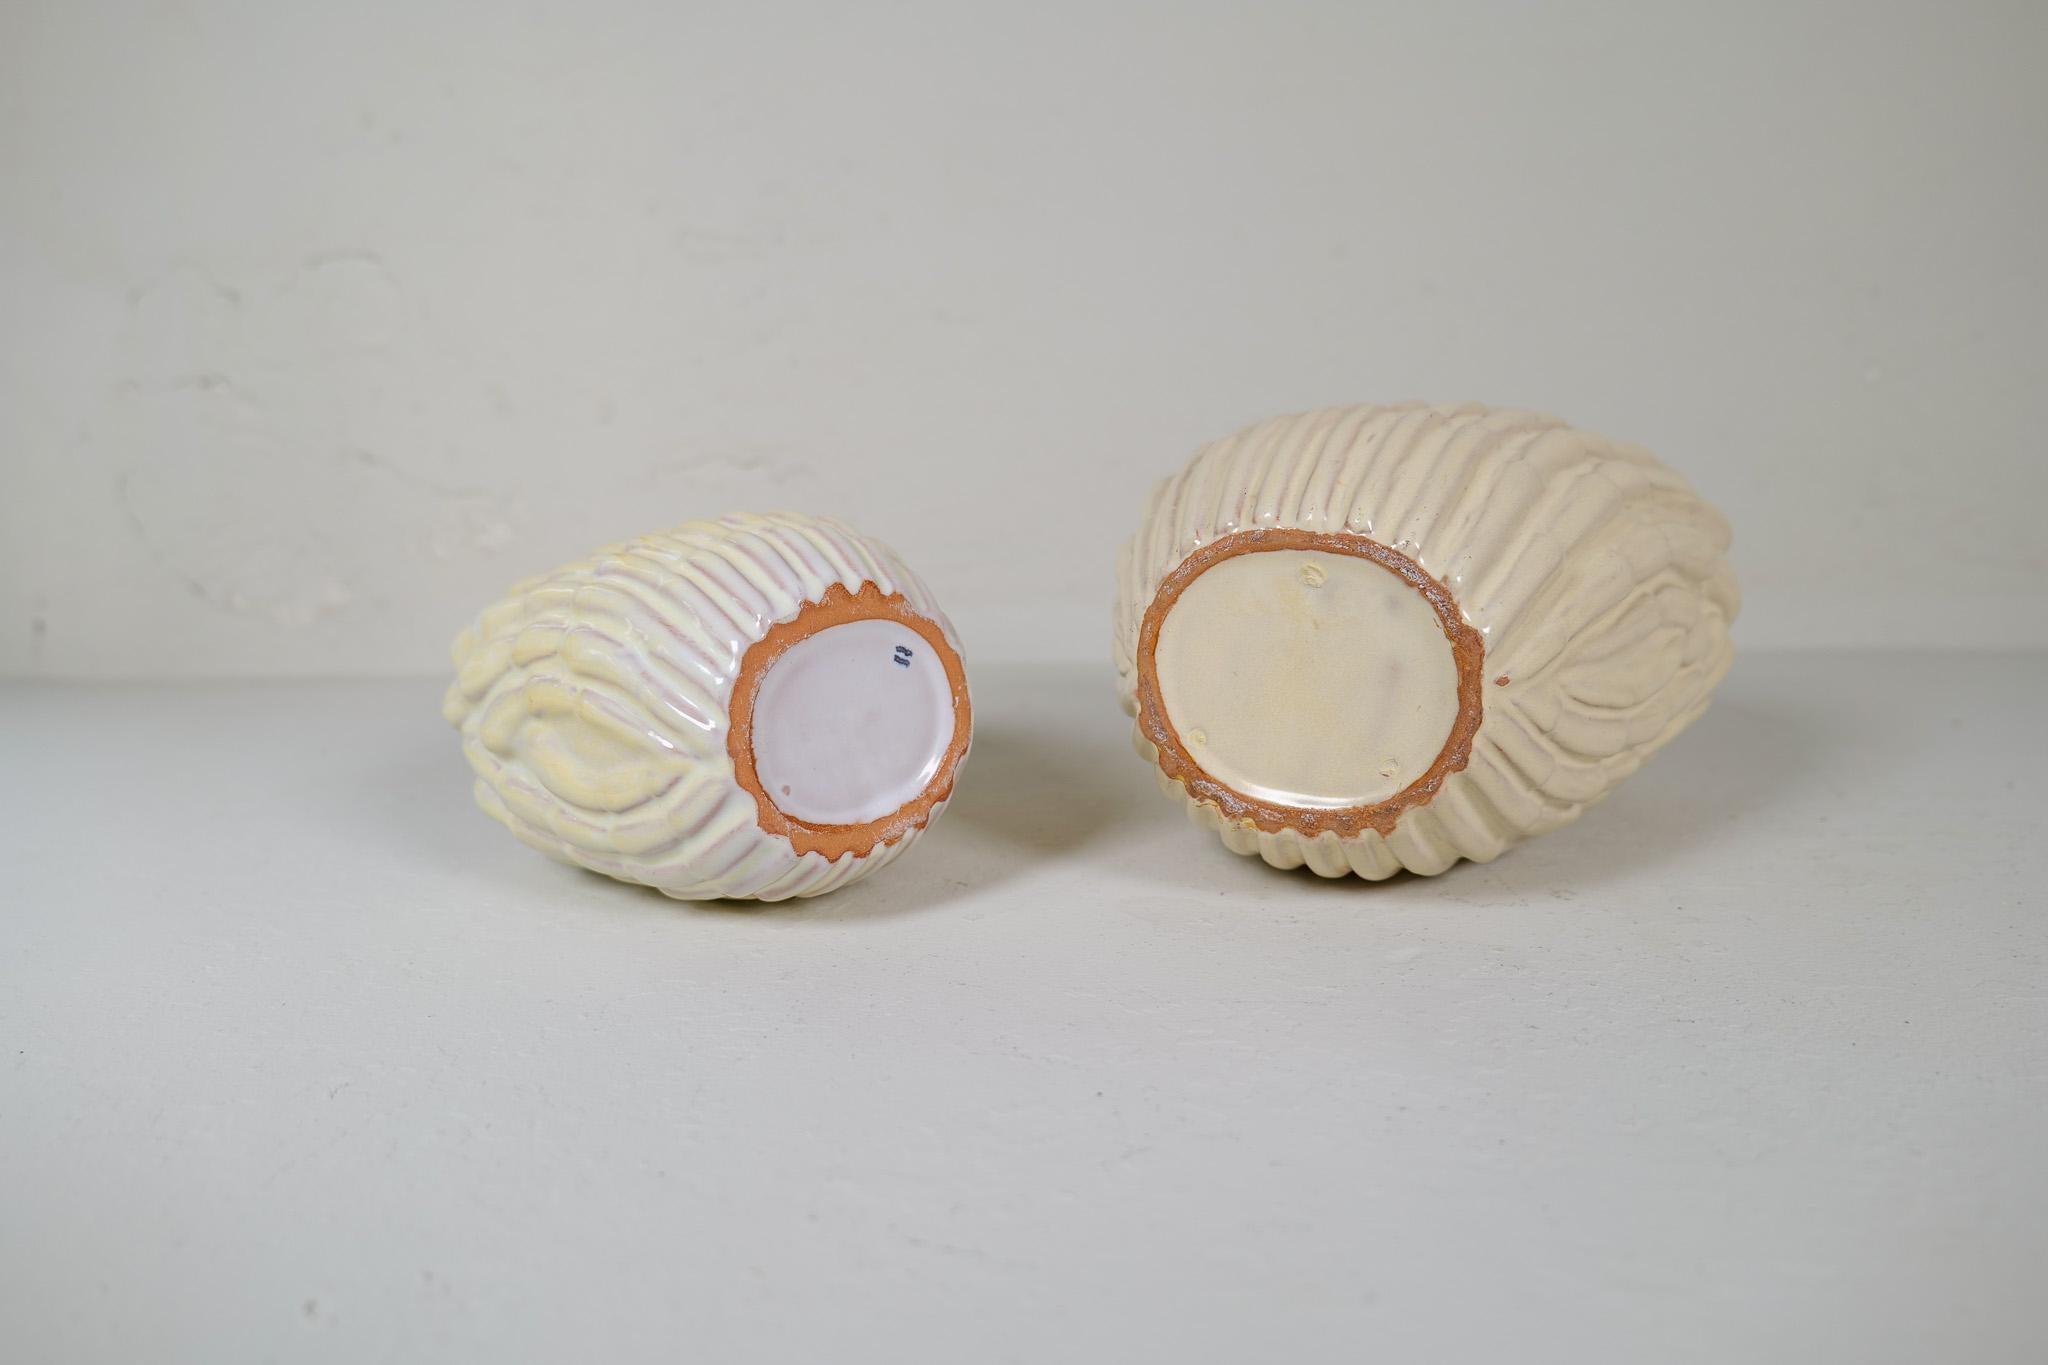 Midcentury Modern Pair of Seashell Vases by Vicke Lindstrand , Sweden For Sale 2